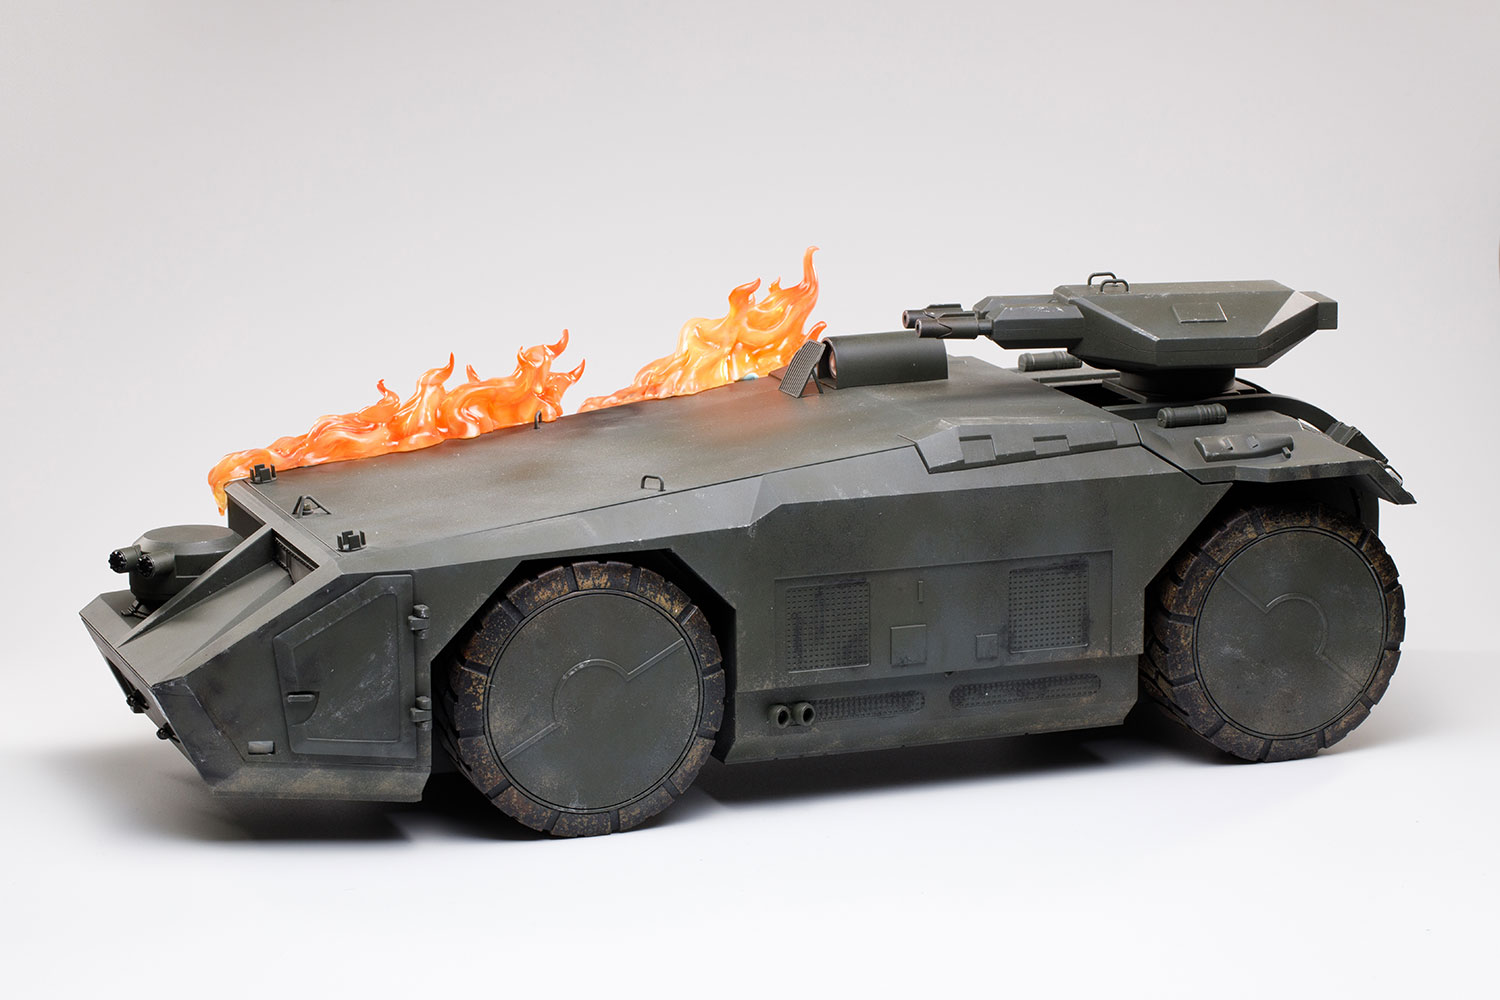 Burning Armored Personnel Carrier- Prototype Shown